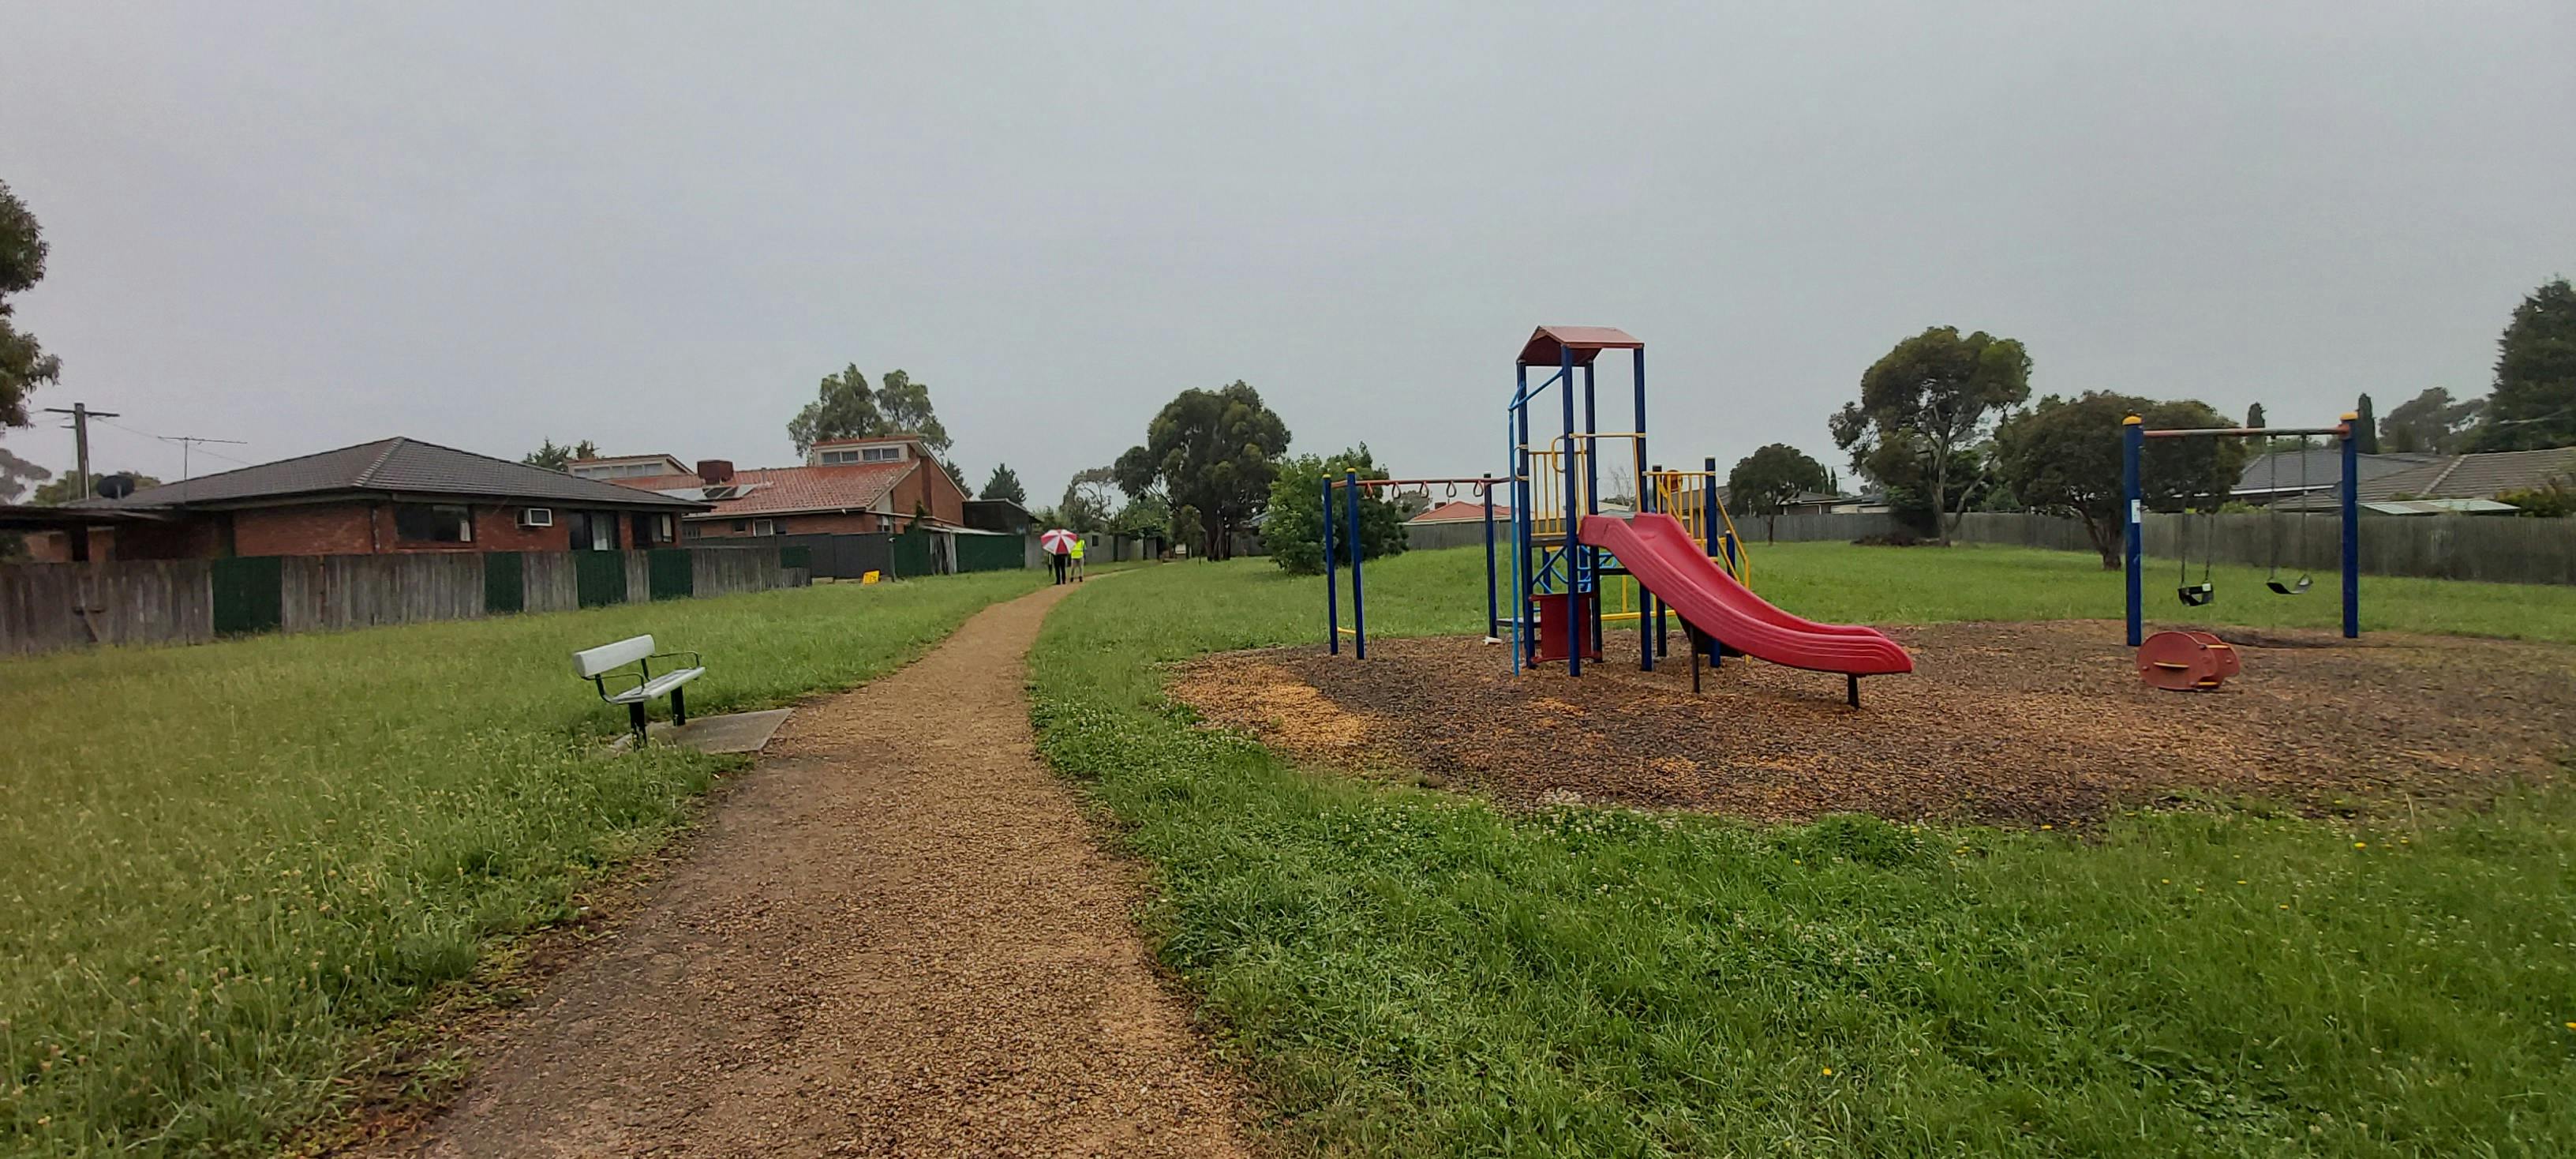 Existing seat and playground.